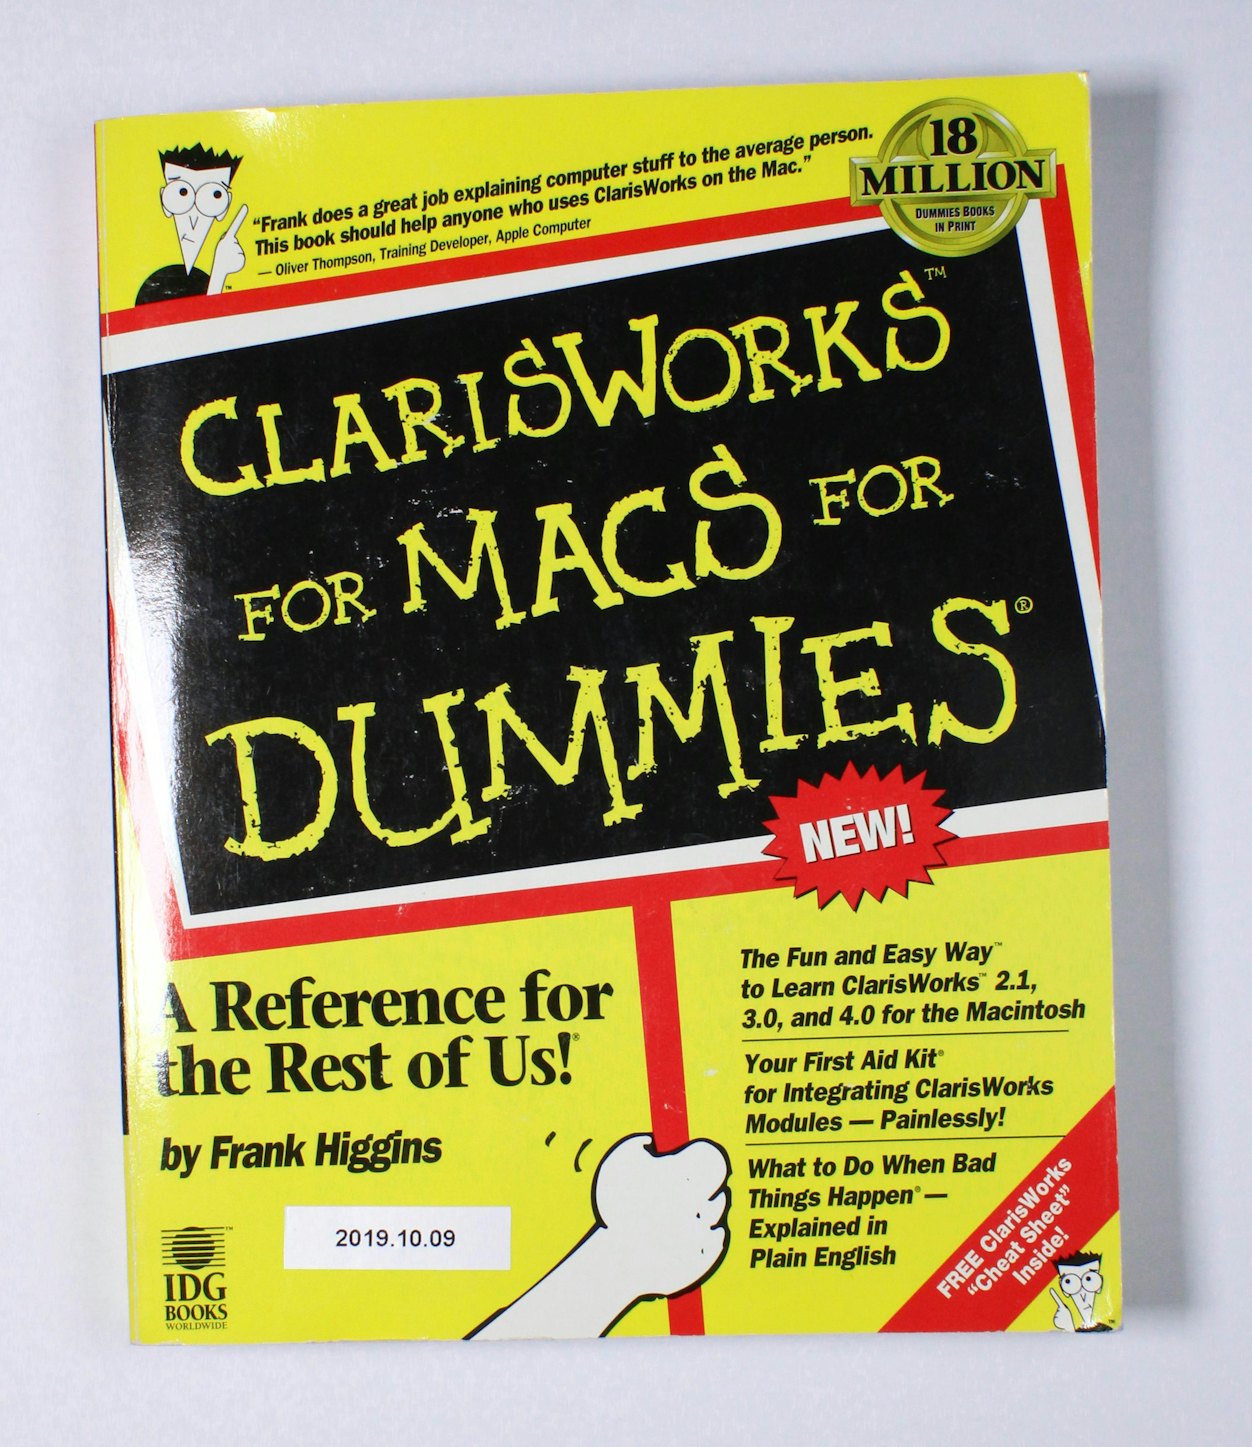 ClarisWorks for Macs for Dummies